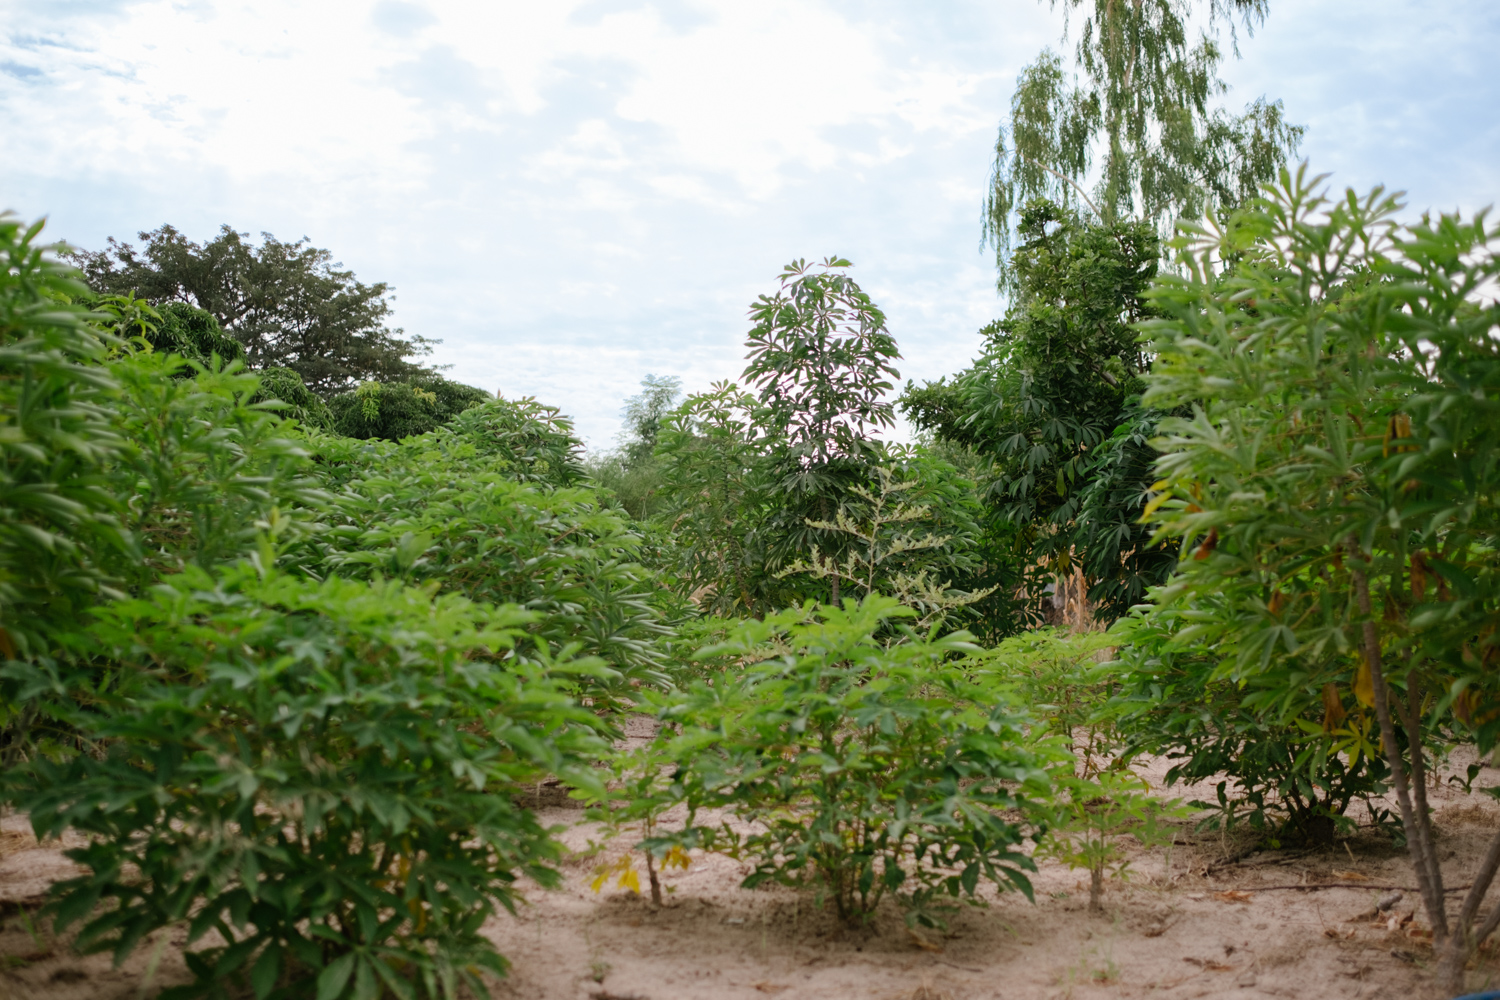 Senegal-Ecosia-Forest-Garden-Agroforestry-trees-climate-change--58-of-103-